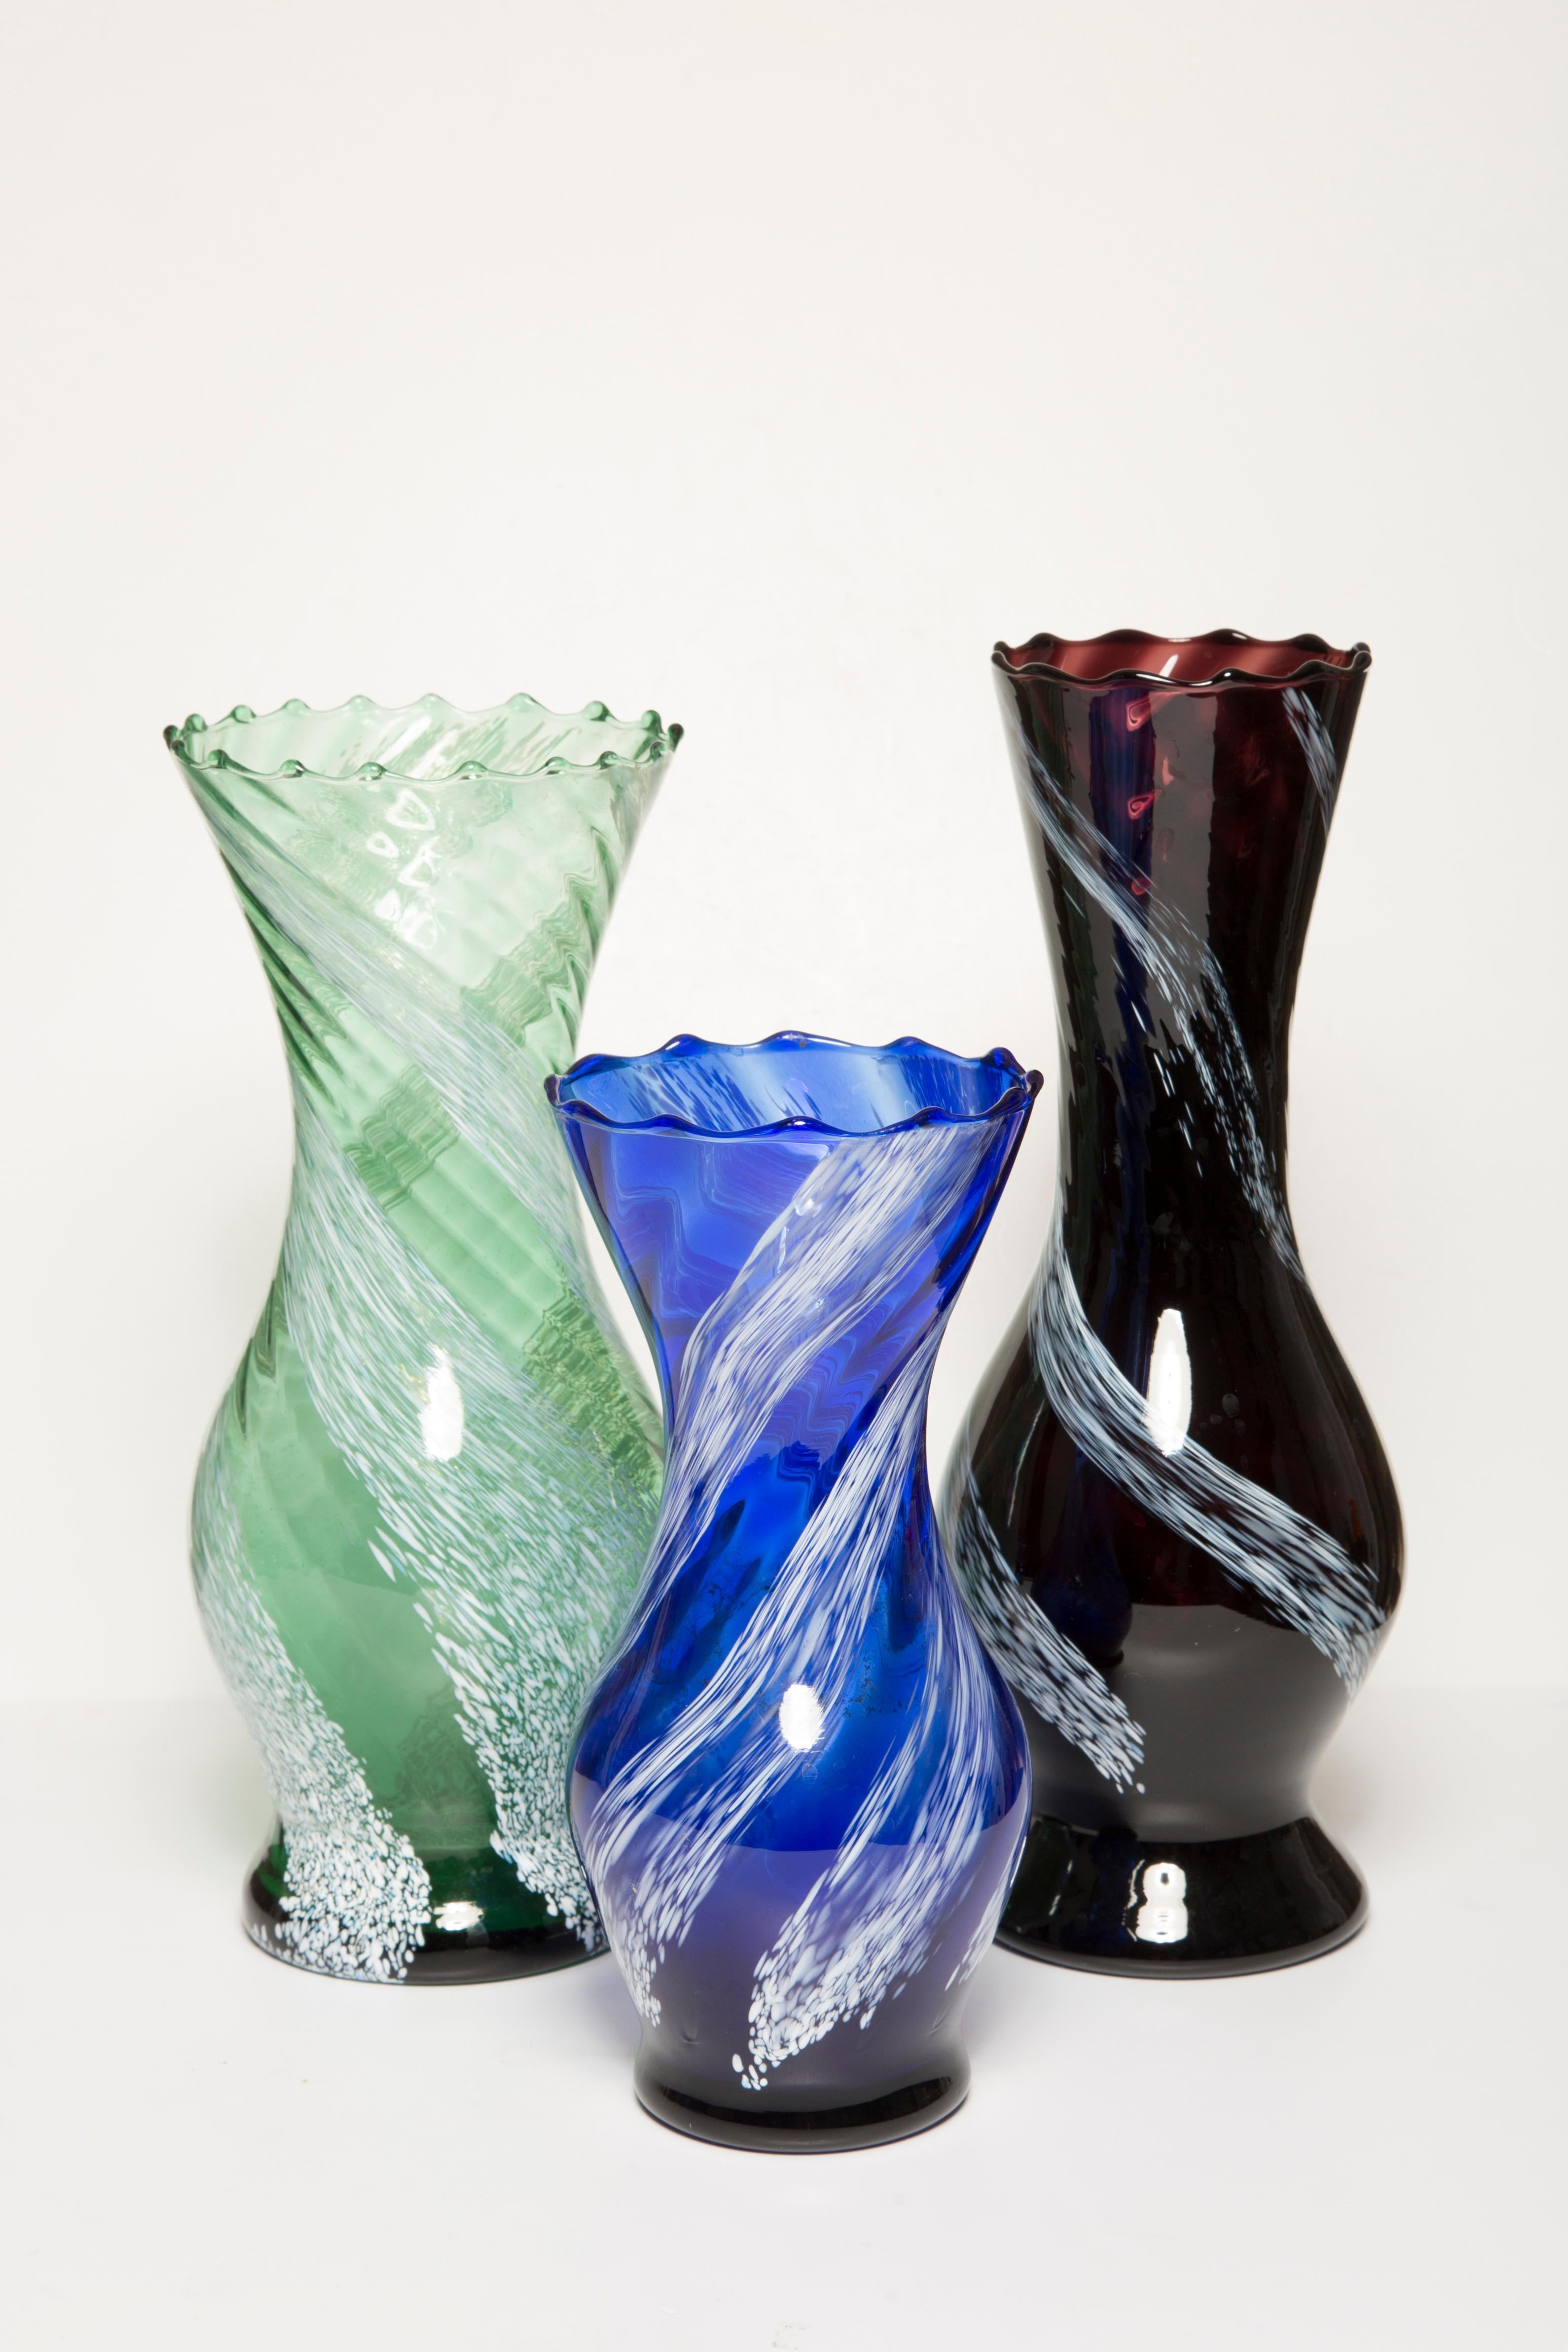 Set of Three vases in amazing organic shape. 
Produced in 1960s. Glass in perfect condition. 
The vases looks like it has just been taken out of the box.

No jags, defects, etc. The outer relief surface, the inner smooth. Thick glass vase,